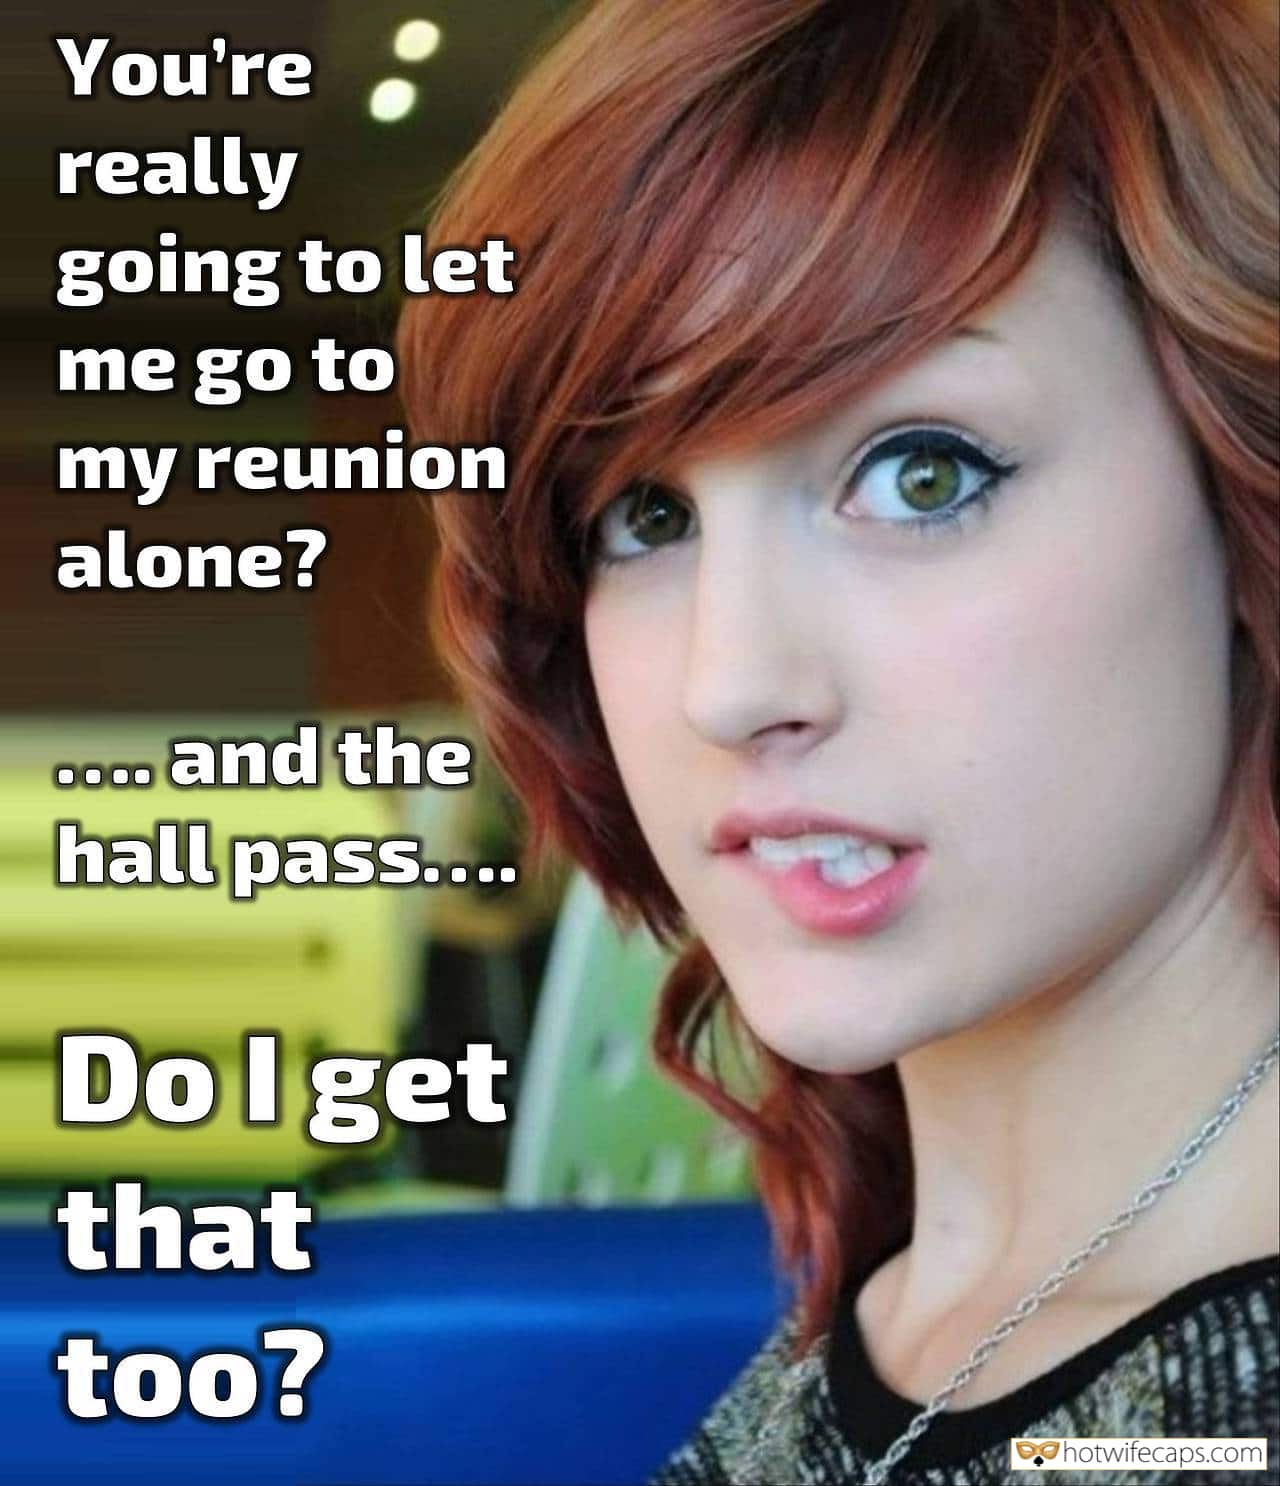 Sexy Memes My Favorite hotwife caption: You’re really going to let me go to my reunion alone? coc. and the hall pass… 0000 DoIget that too? Enjoy the Night With Old Buddies